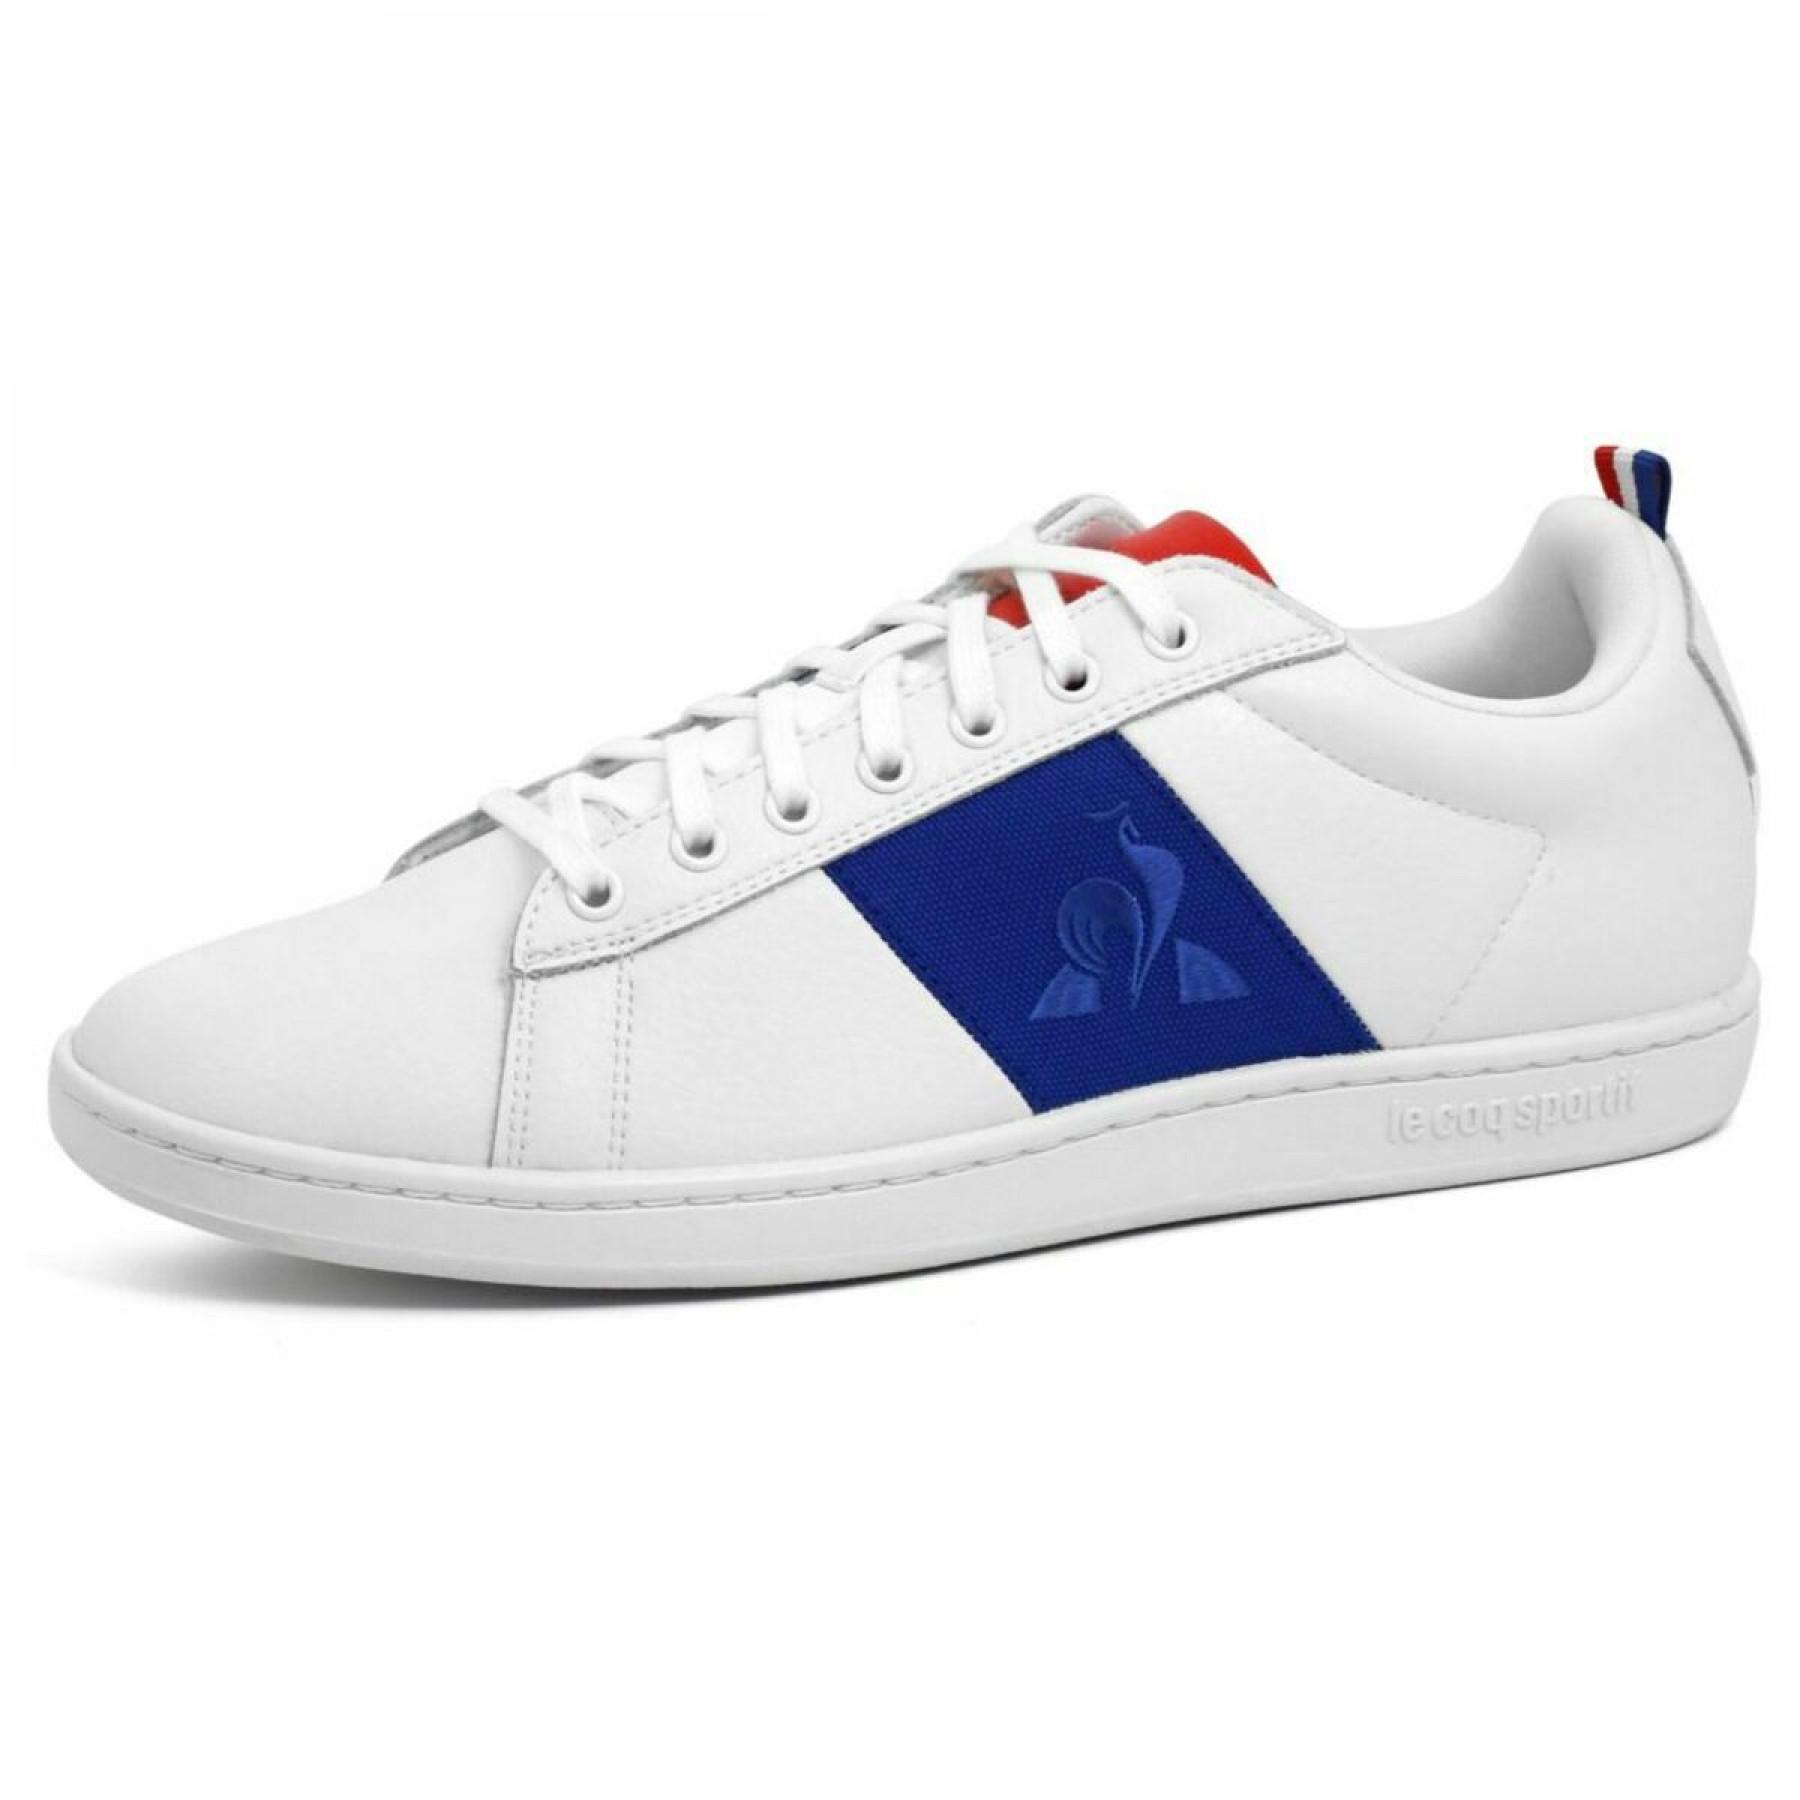 Formadores Le Coq Sportif Courtclassic bbr